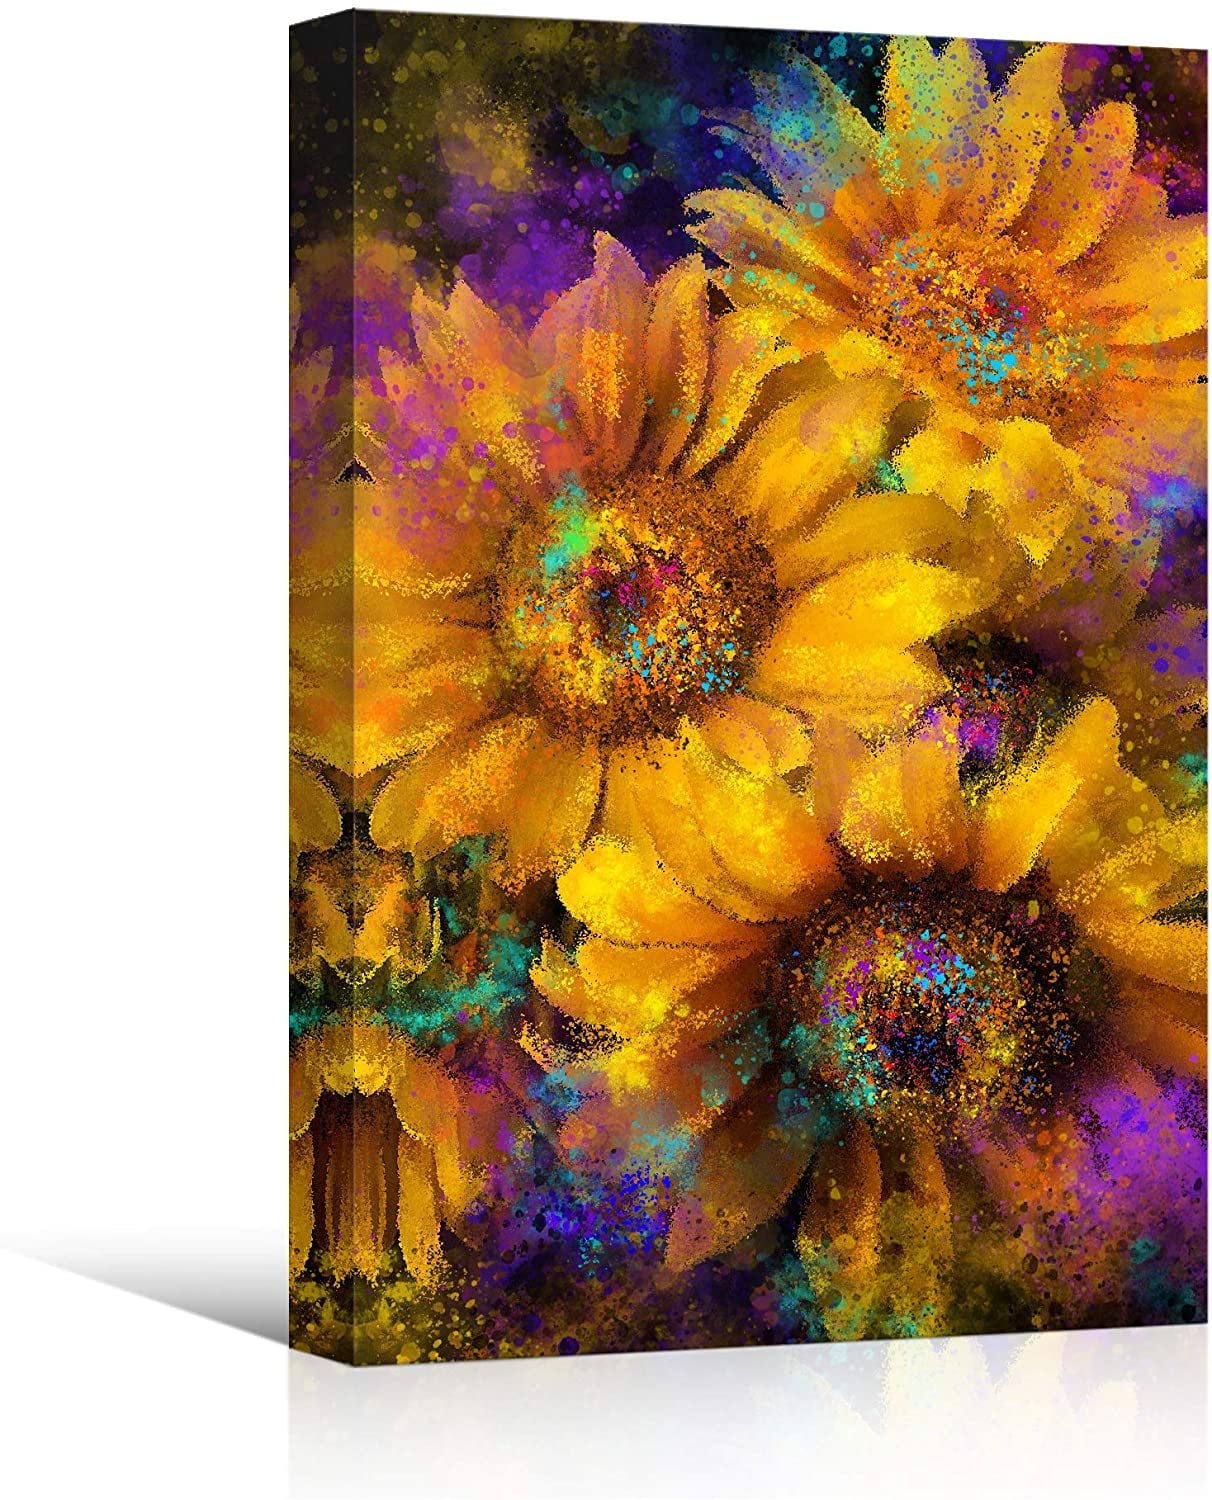 SUNFLOWER GROW by AM 7" x 7" Set of 2 Printed POT HOLDERS